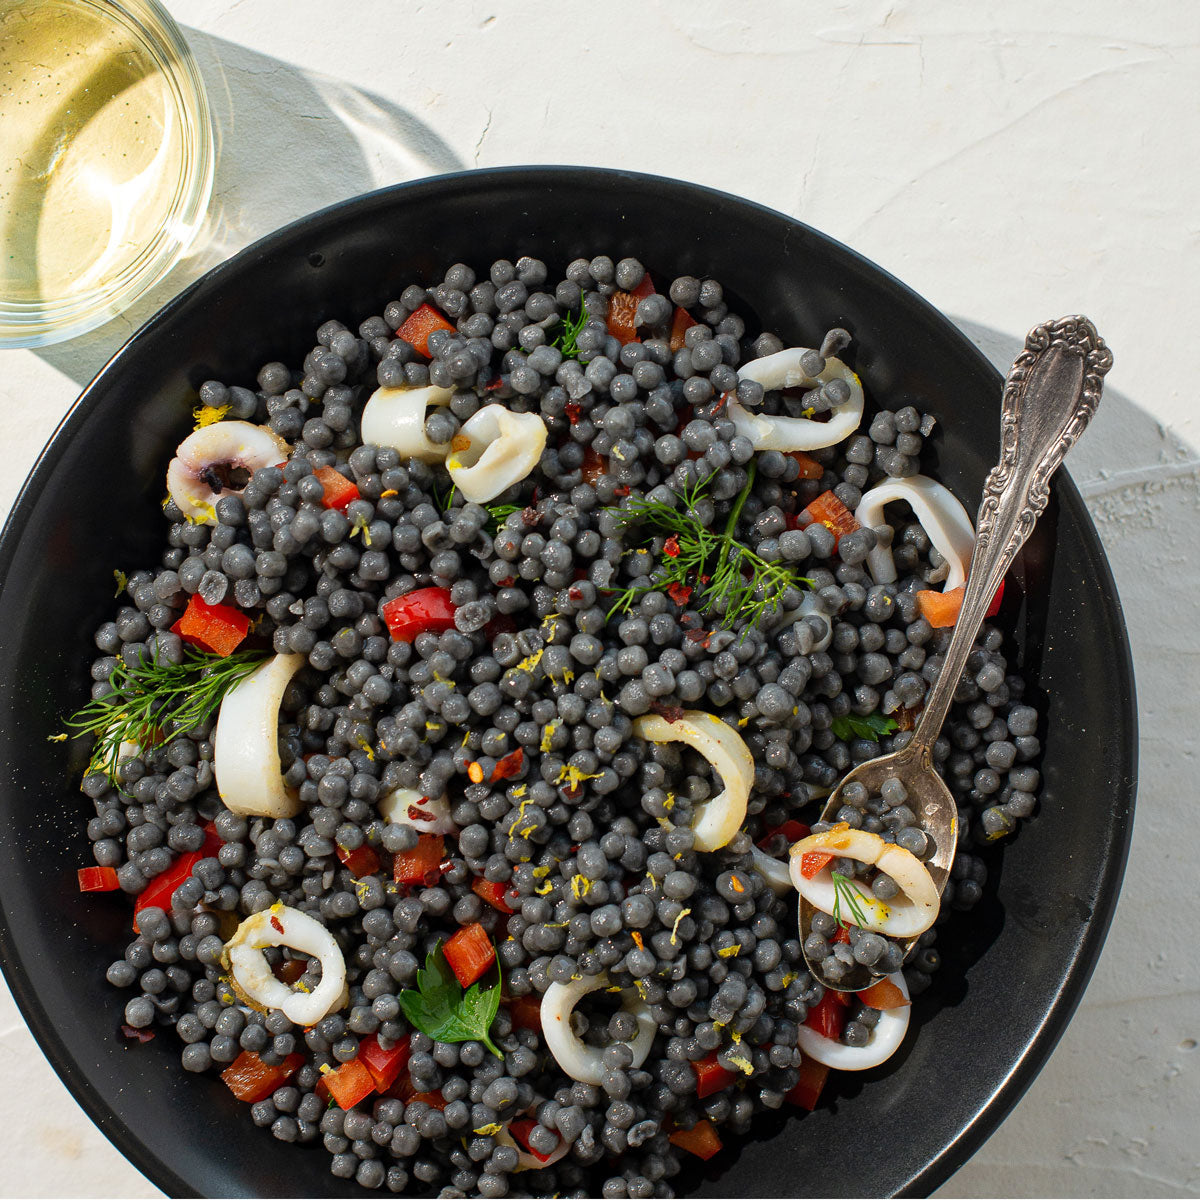 Squid ink couscous dish with calamari and Greek olive oil